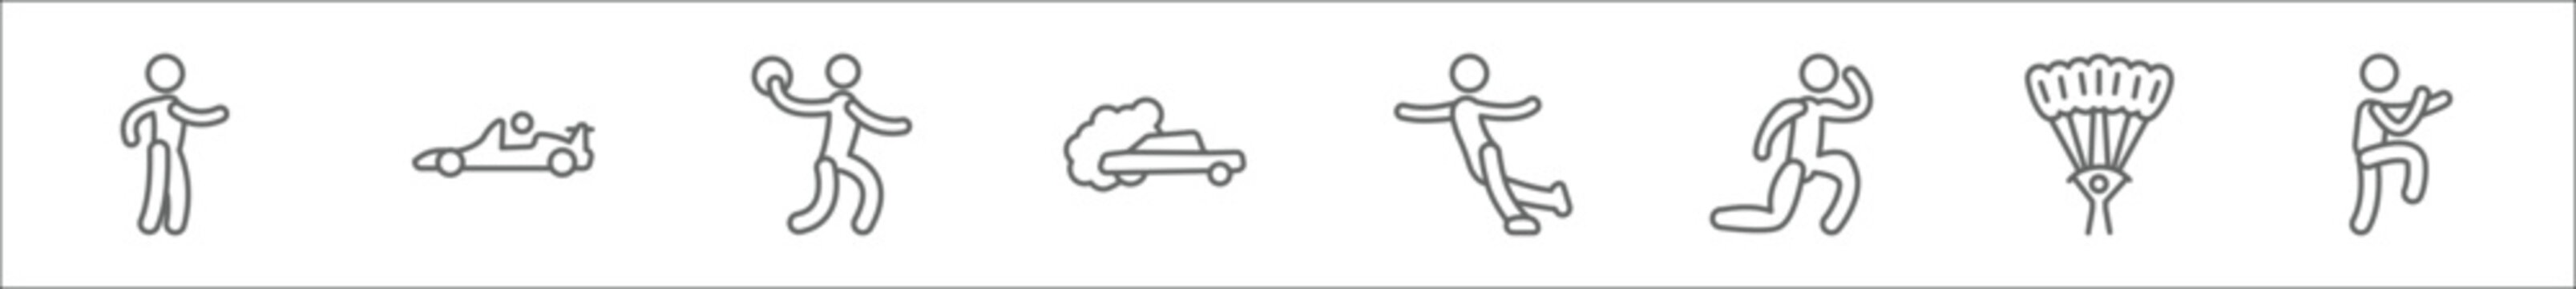 outline set of sport line icons. linear vector icons such as racewalking, formula racing, dodgeball, drifting, figure skating, bodybuilding, paragliding, aikido